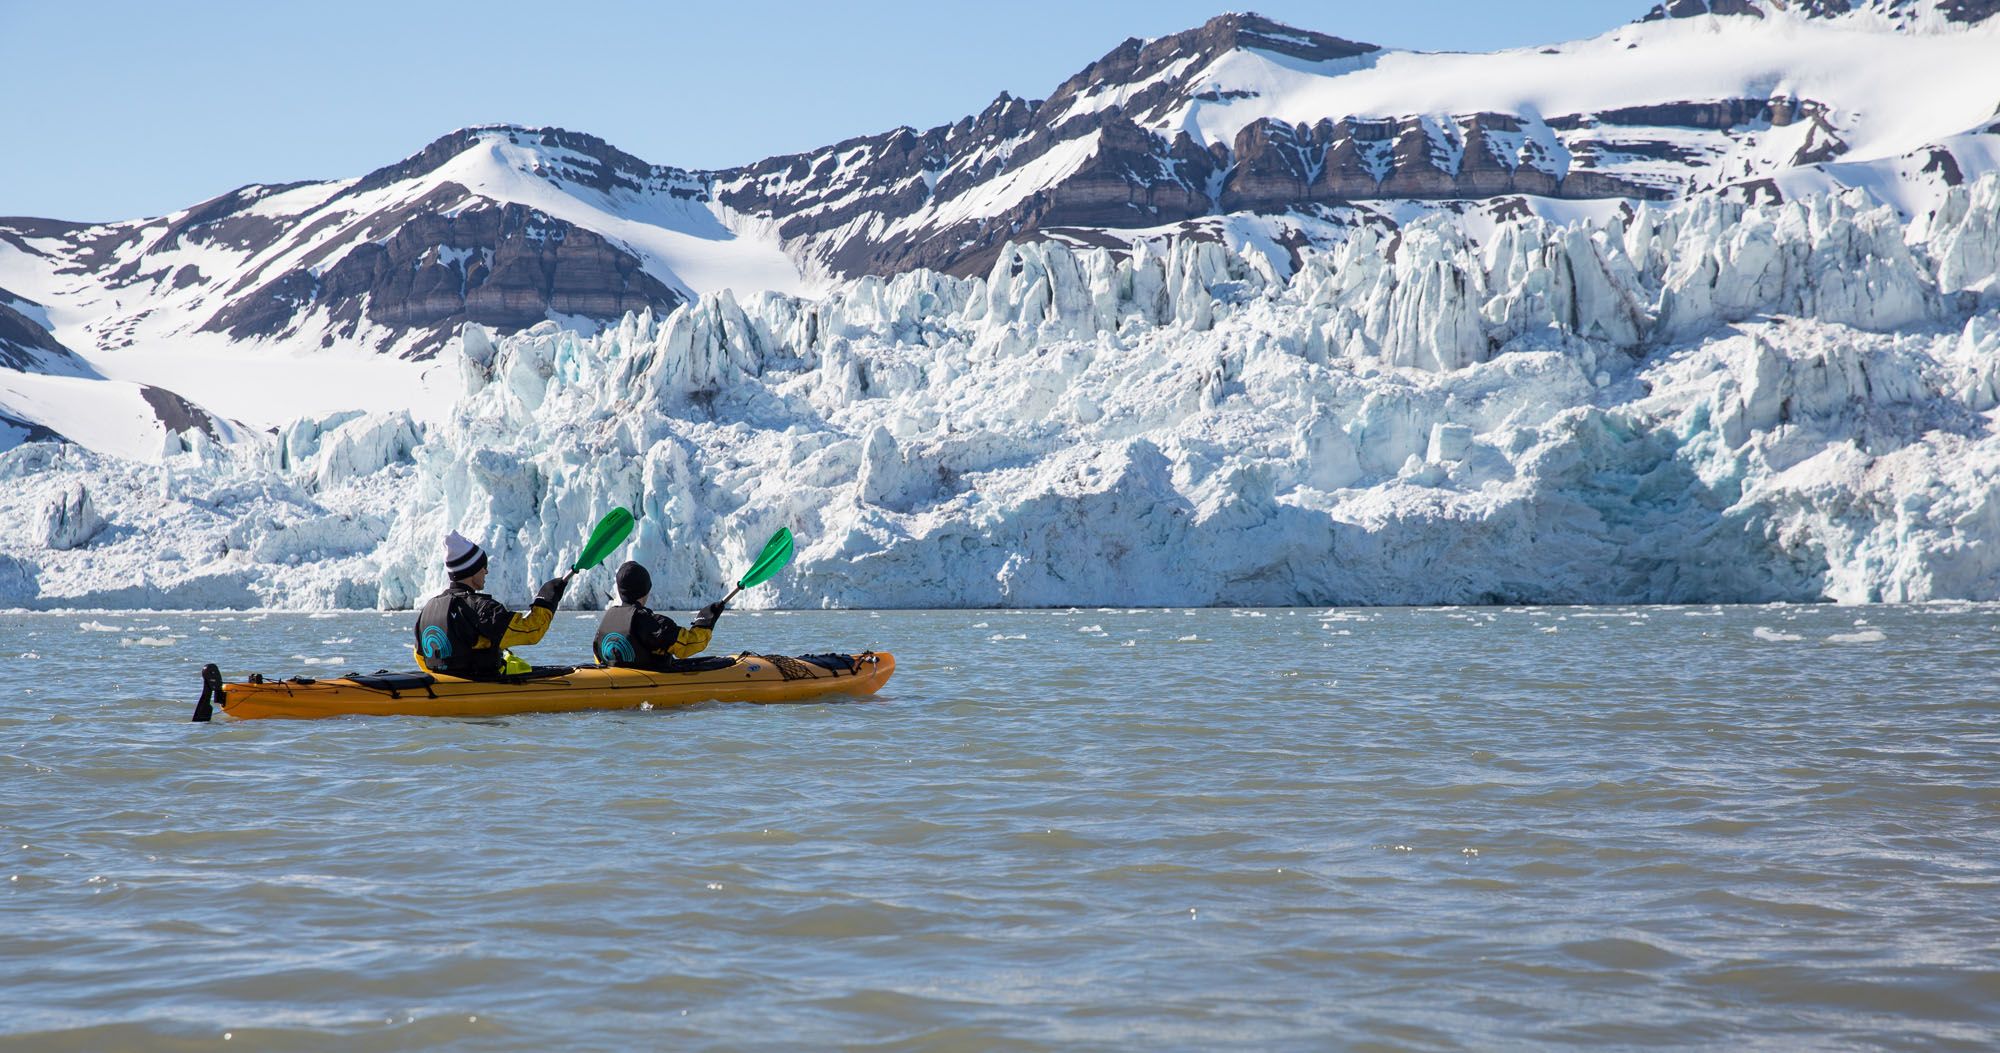 Featured image for “Glacier Kayaking in Svalbard, Norway”